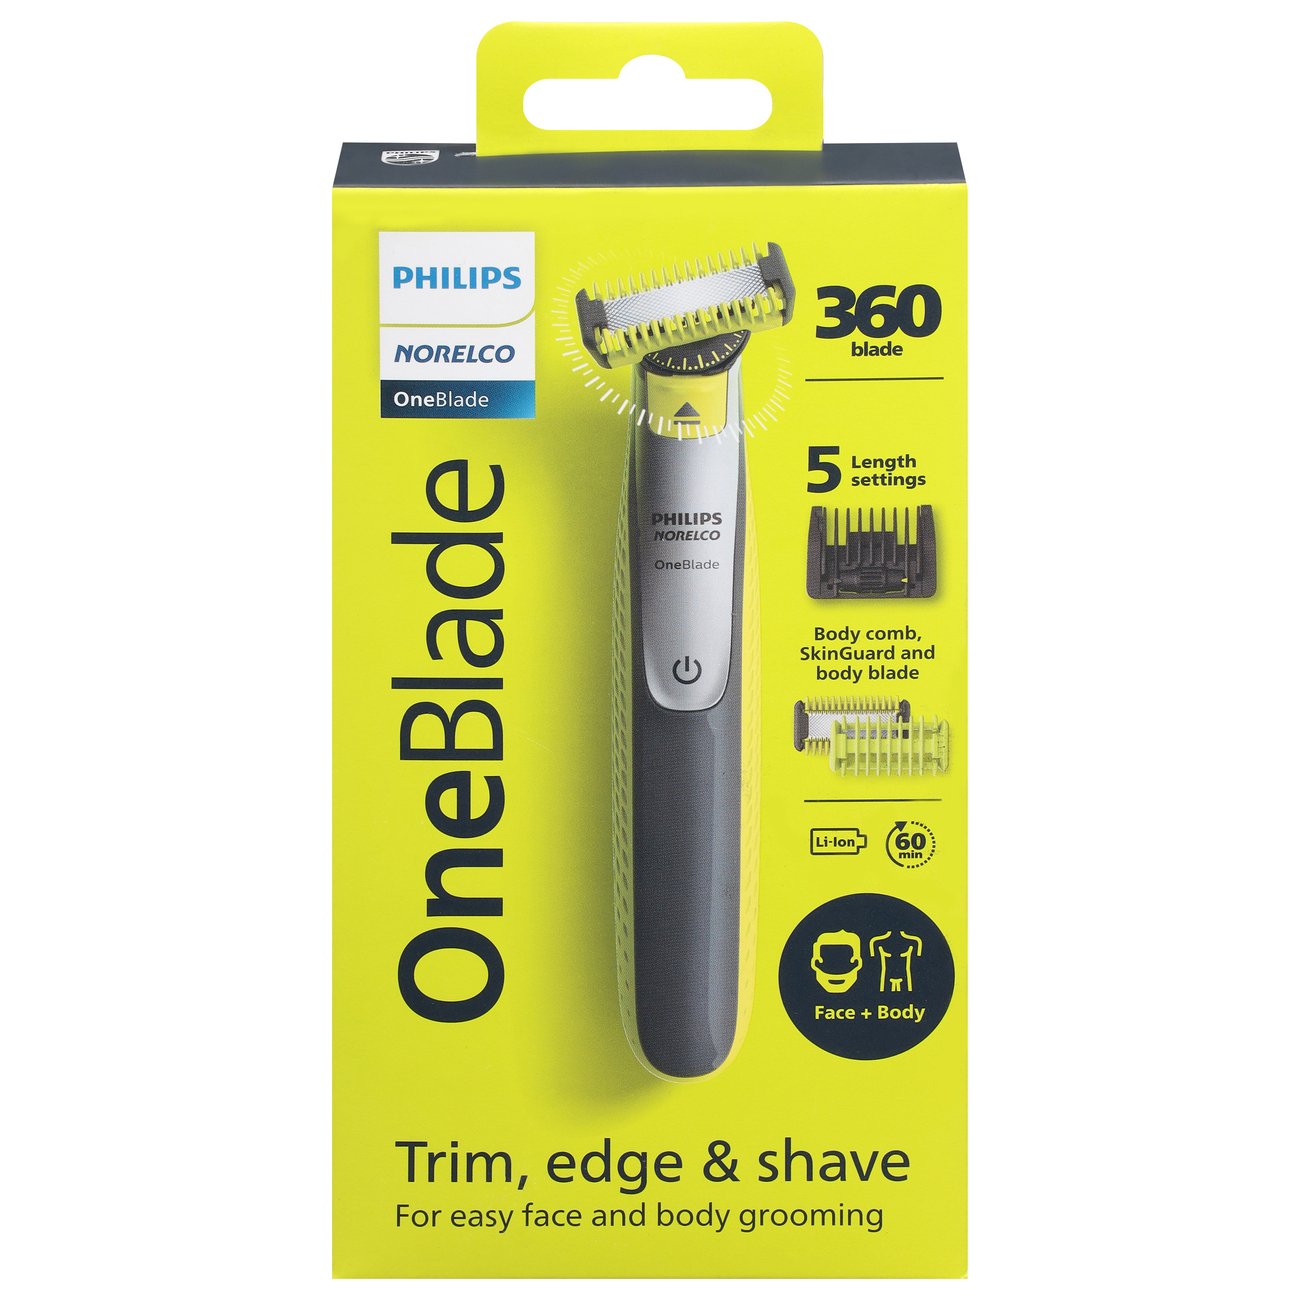 Philips Norelco OneBlade 360 Face & Body Electric Trimmer